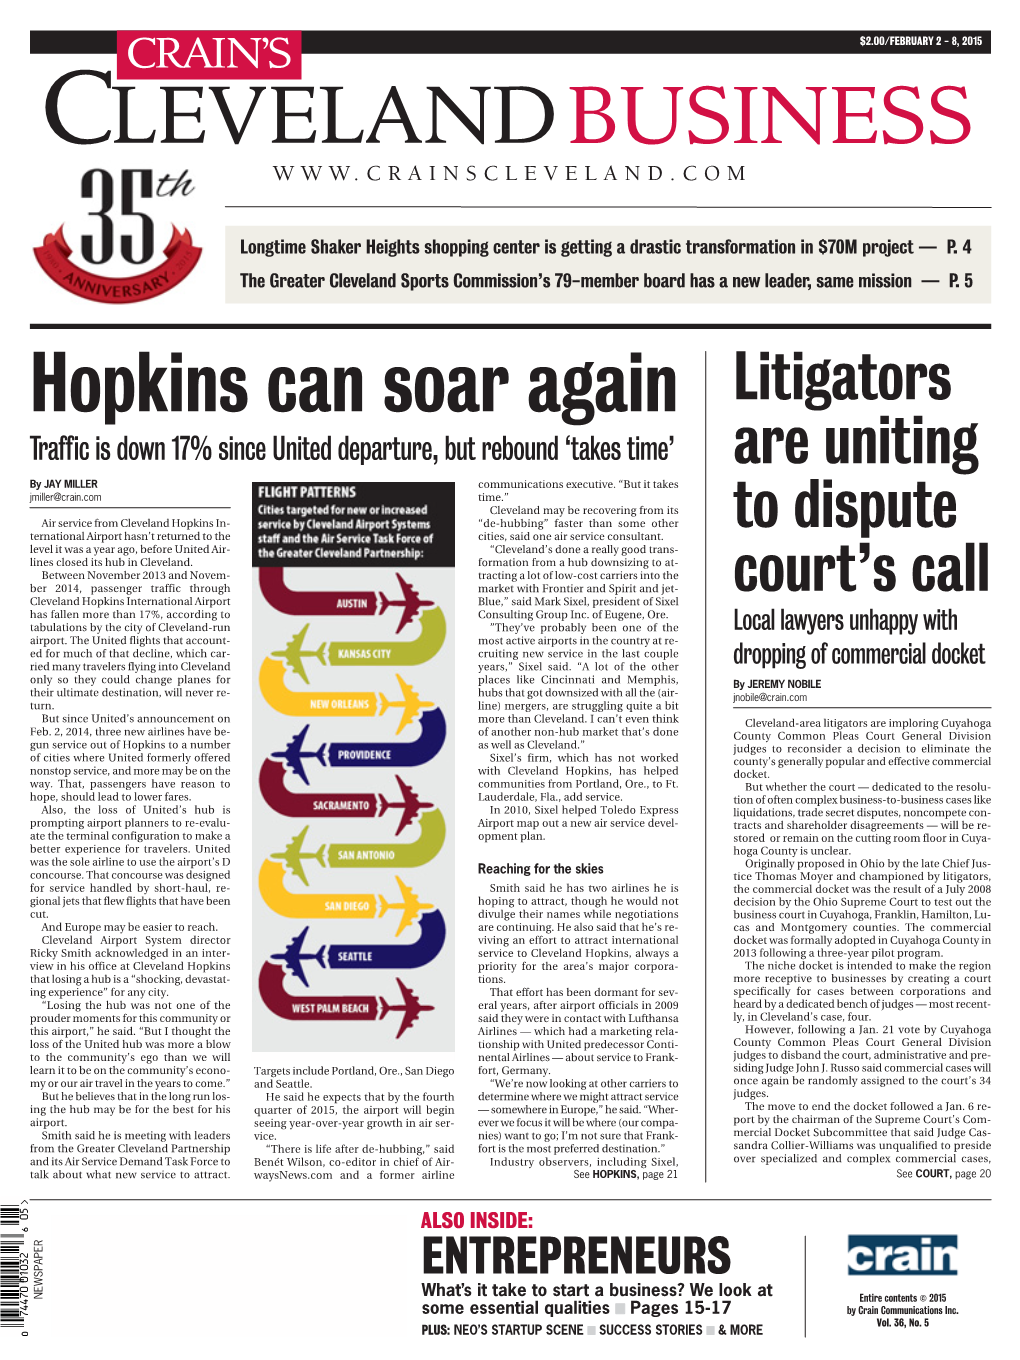 Hopkins Can Soar Again Litigators Traffic Is Down 17% Since United Departure, but Rebound ‘Takes Time’ Are Uniting by JAY MILLER Communications Executive